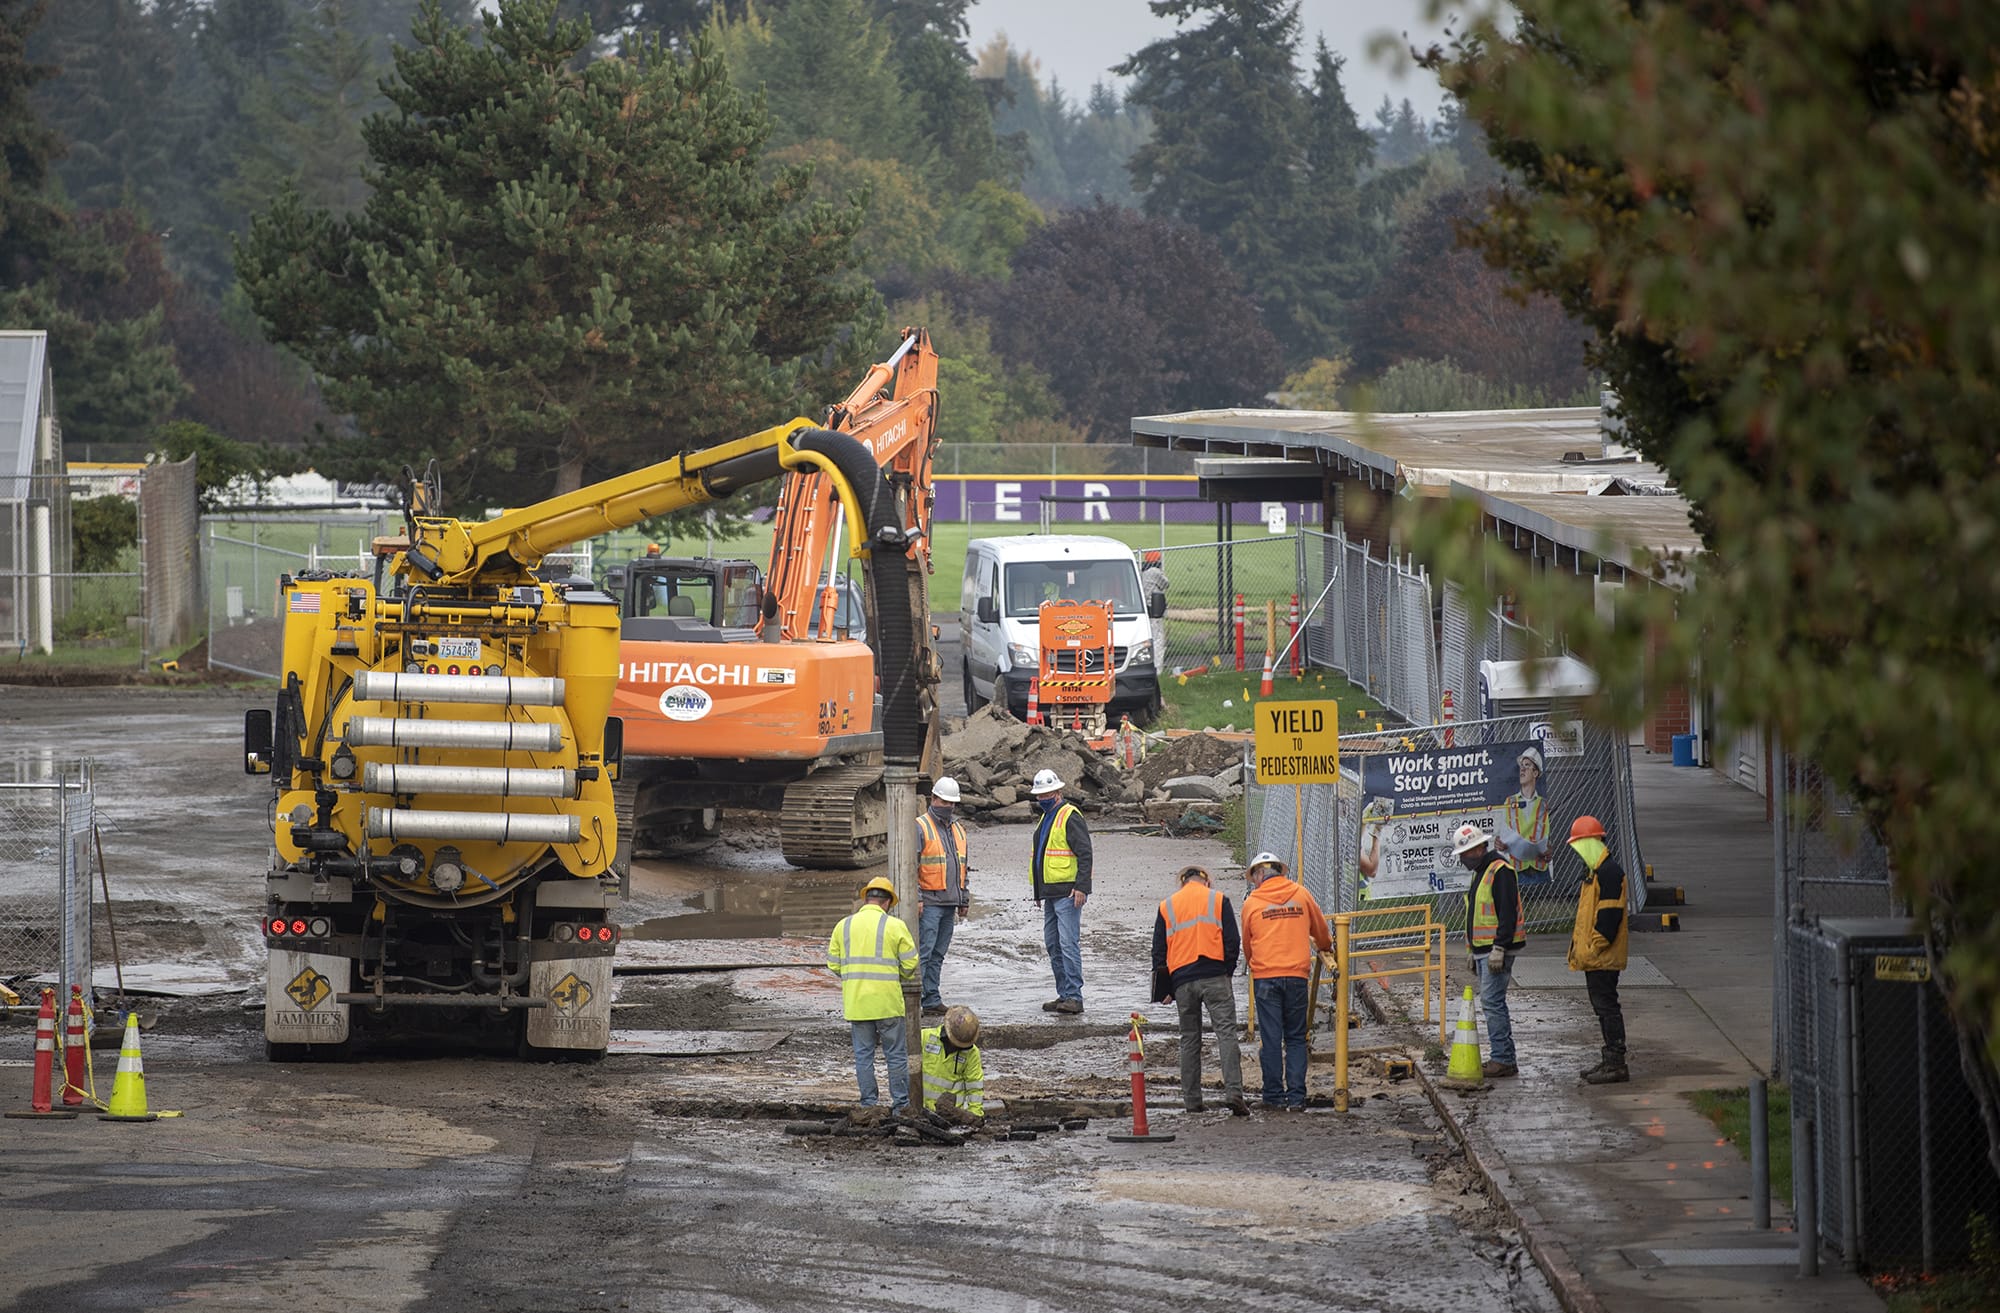 Contractors work a water main break at Columbia River High School in Vancouver on Oct. 16, 2020.